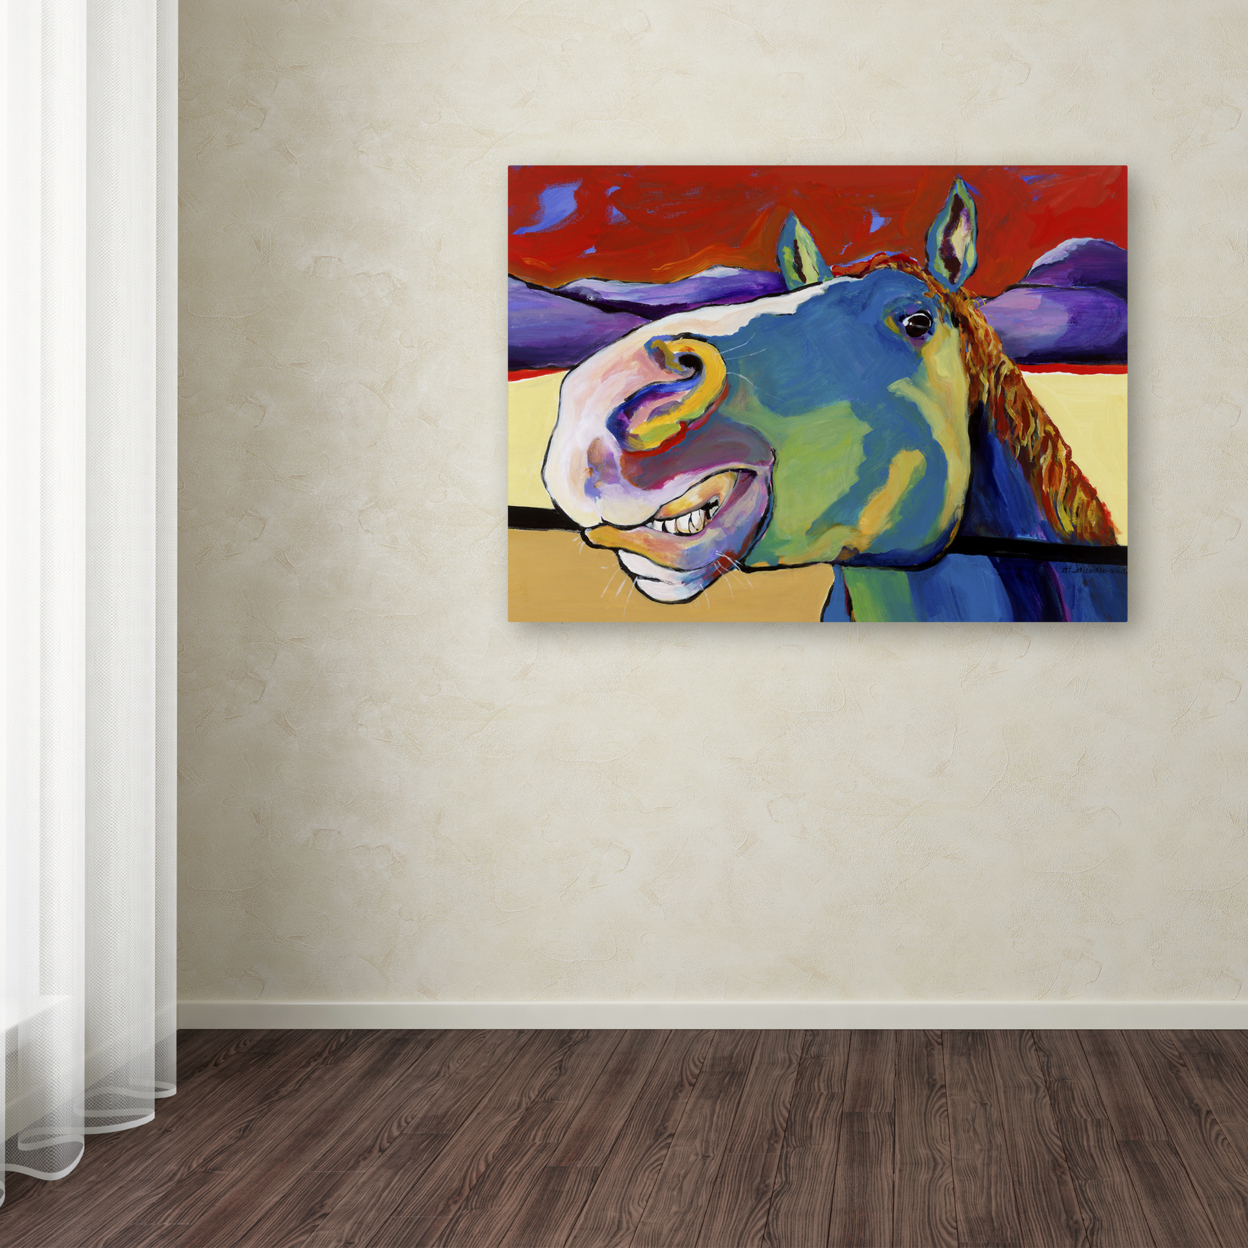 Pat Saunders-White 'Eye To Eye' Canvas Wall Art 35 X 47 Inches